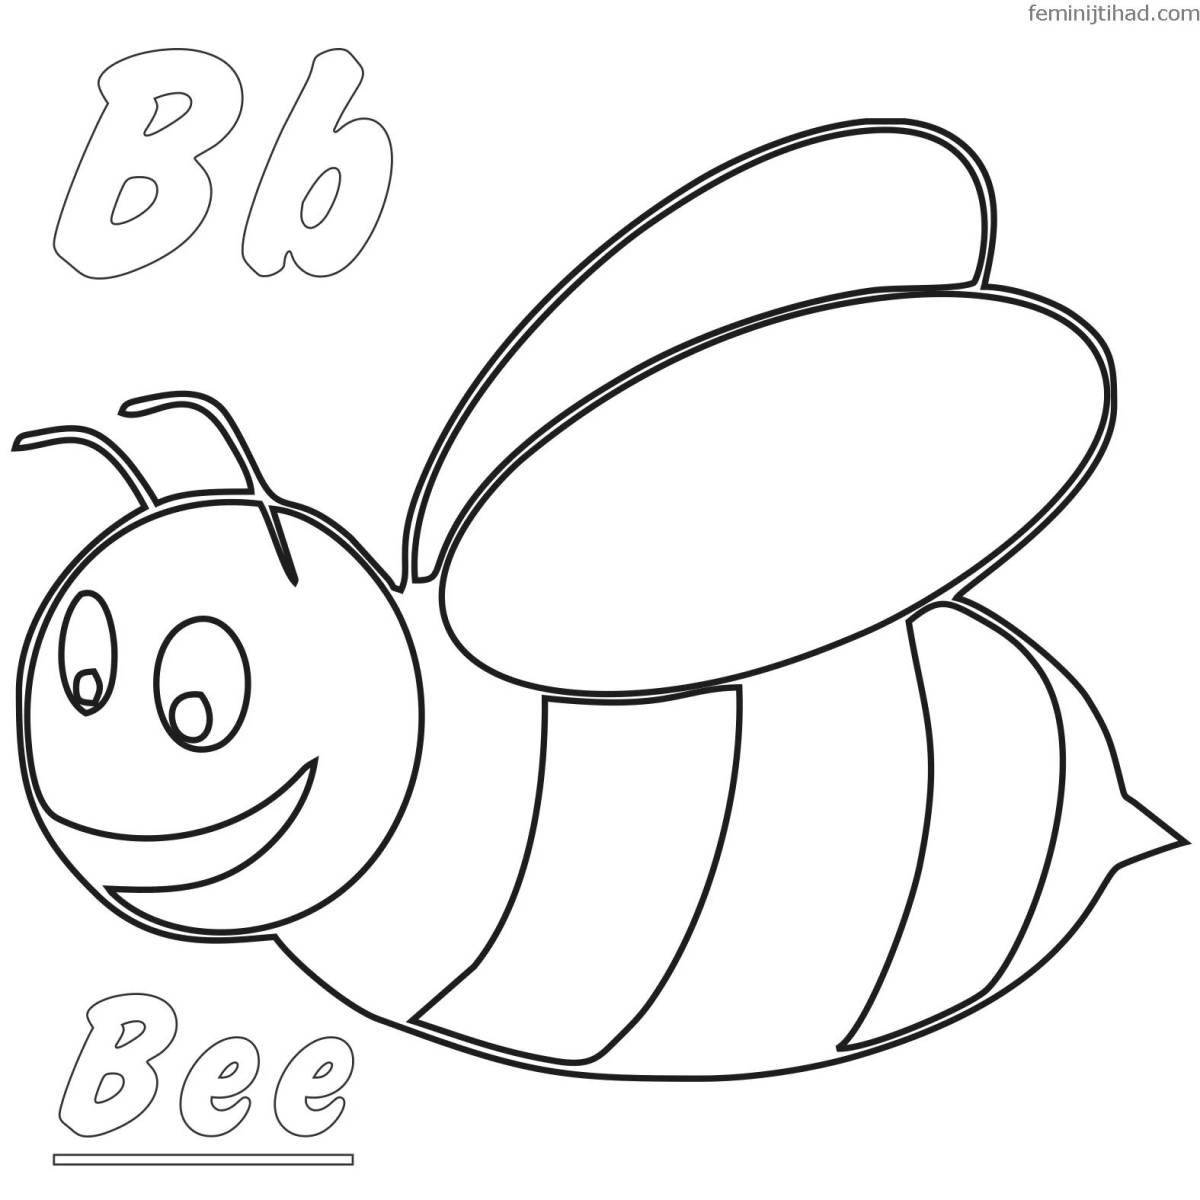 Awesome bee coloring page for 6-7 year olds